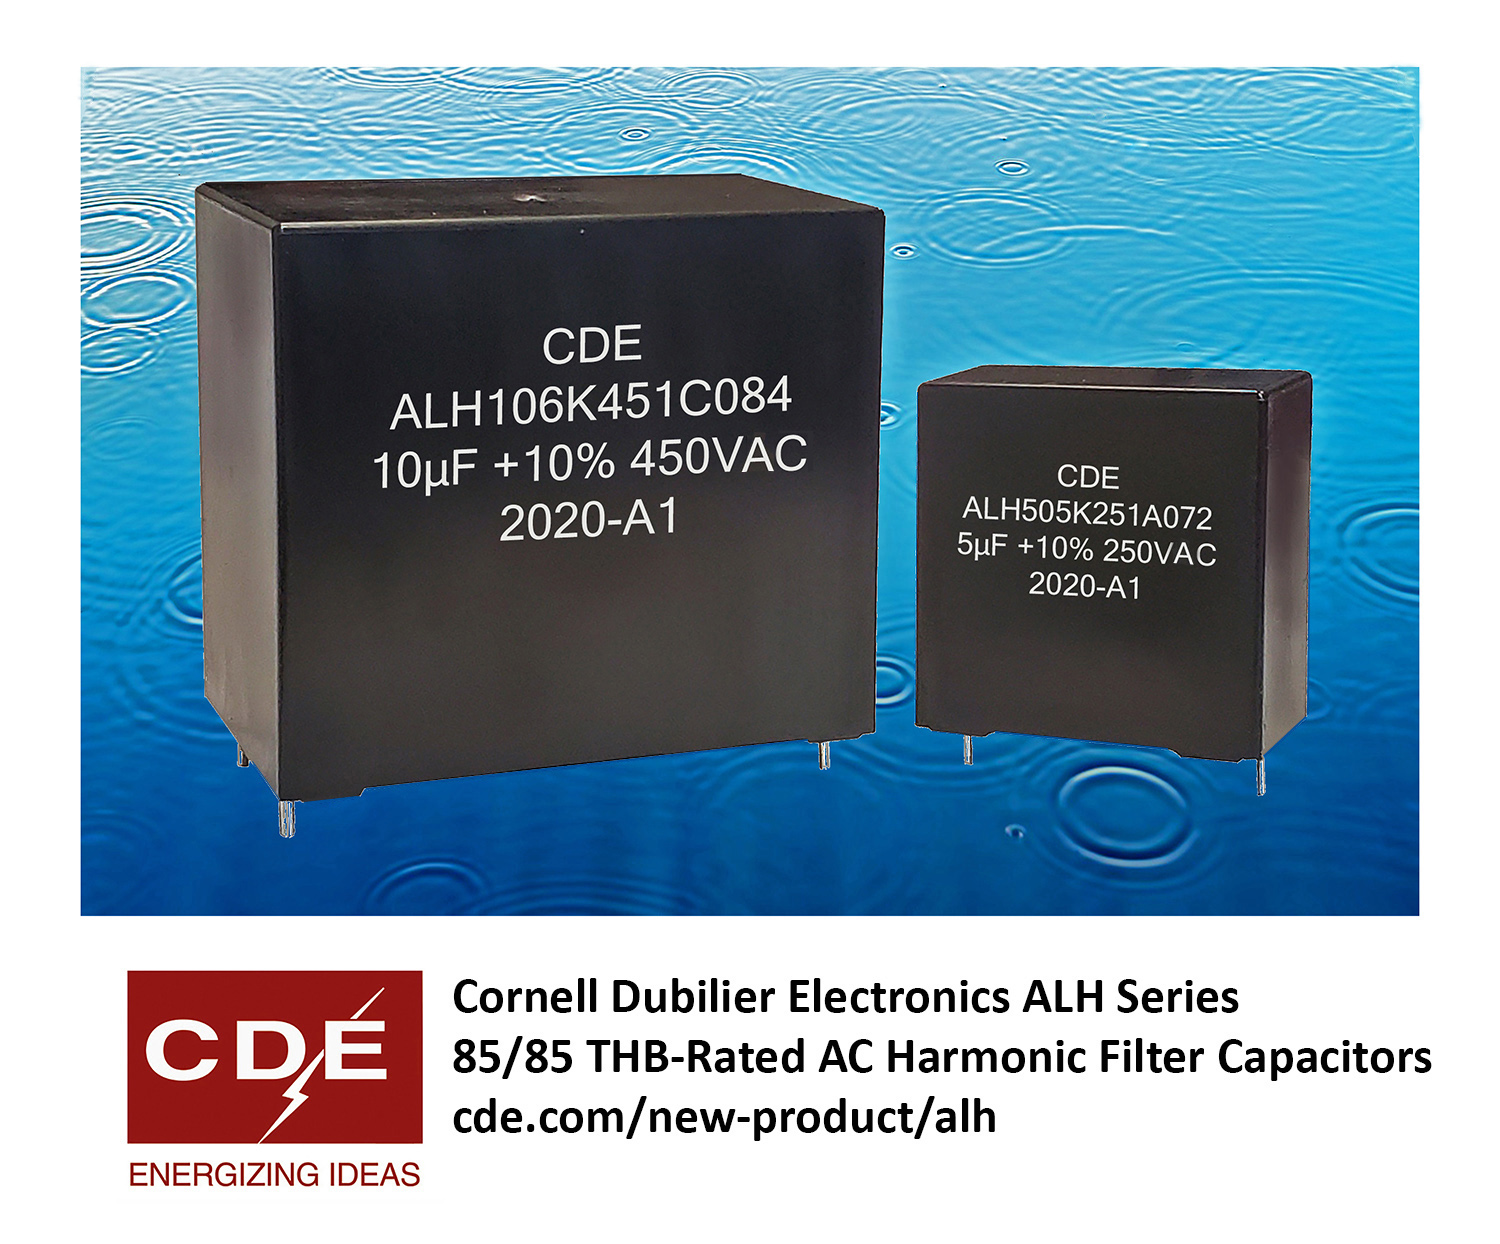 AC-Rated Filter Capacitors Offer 50% Greater Life